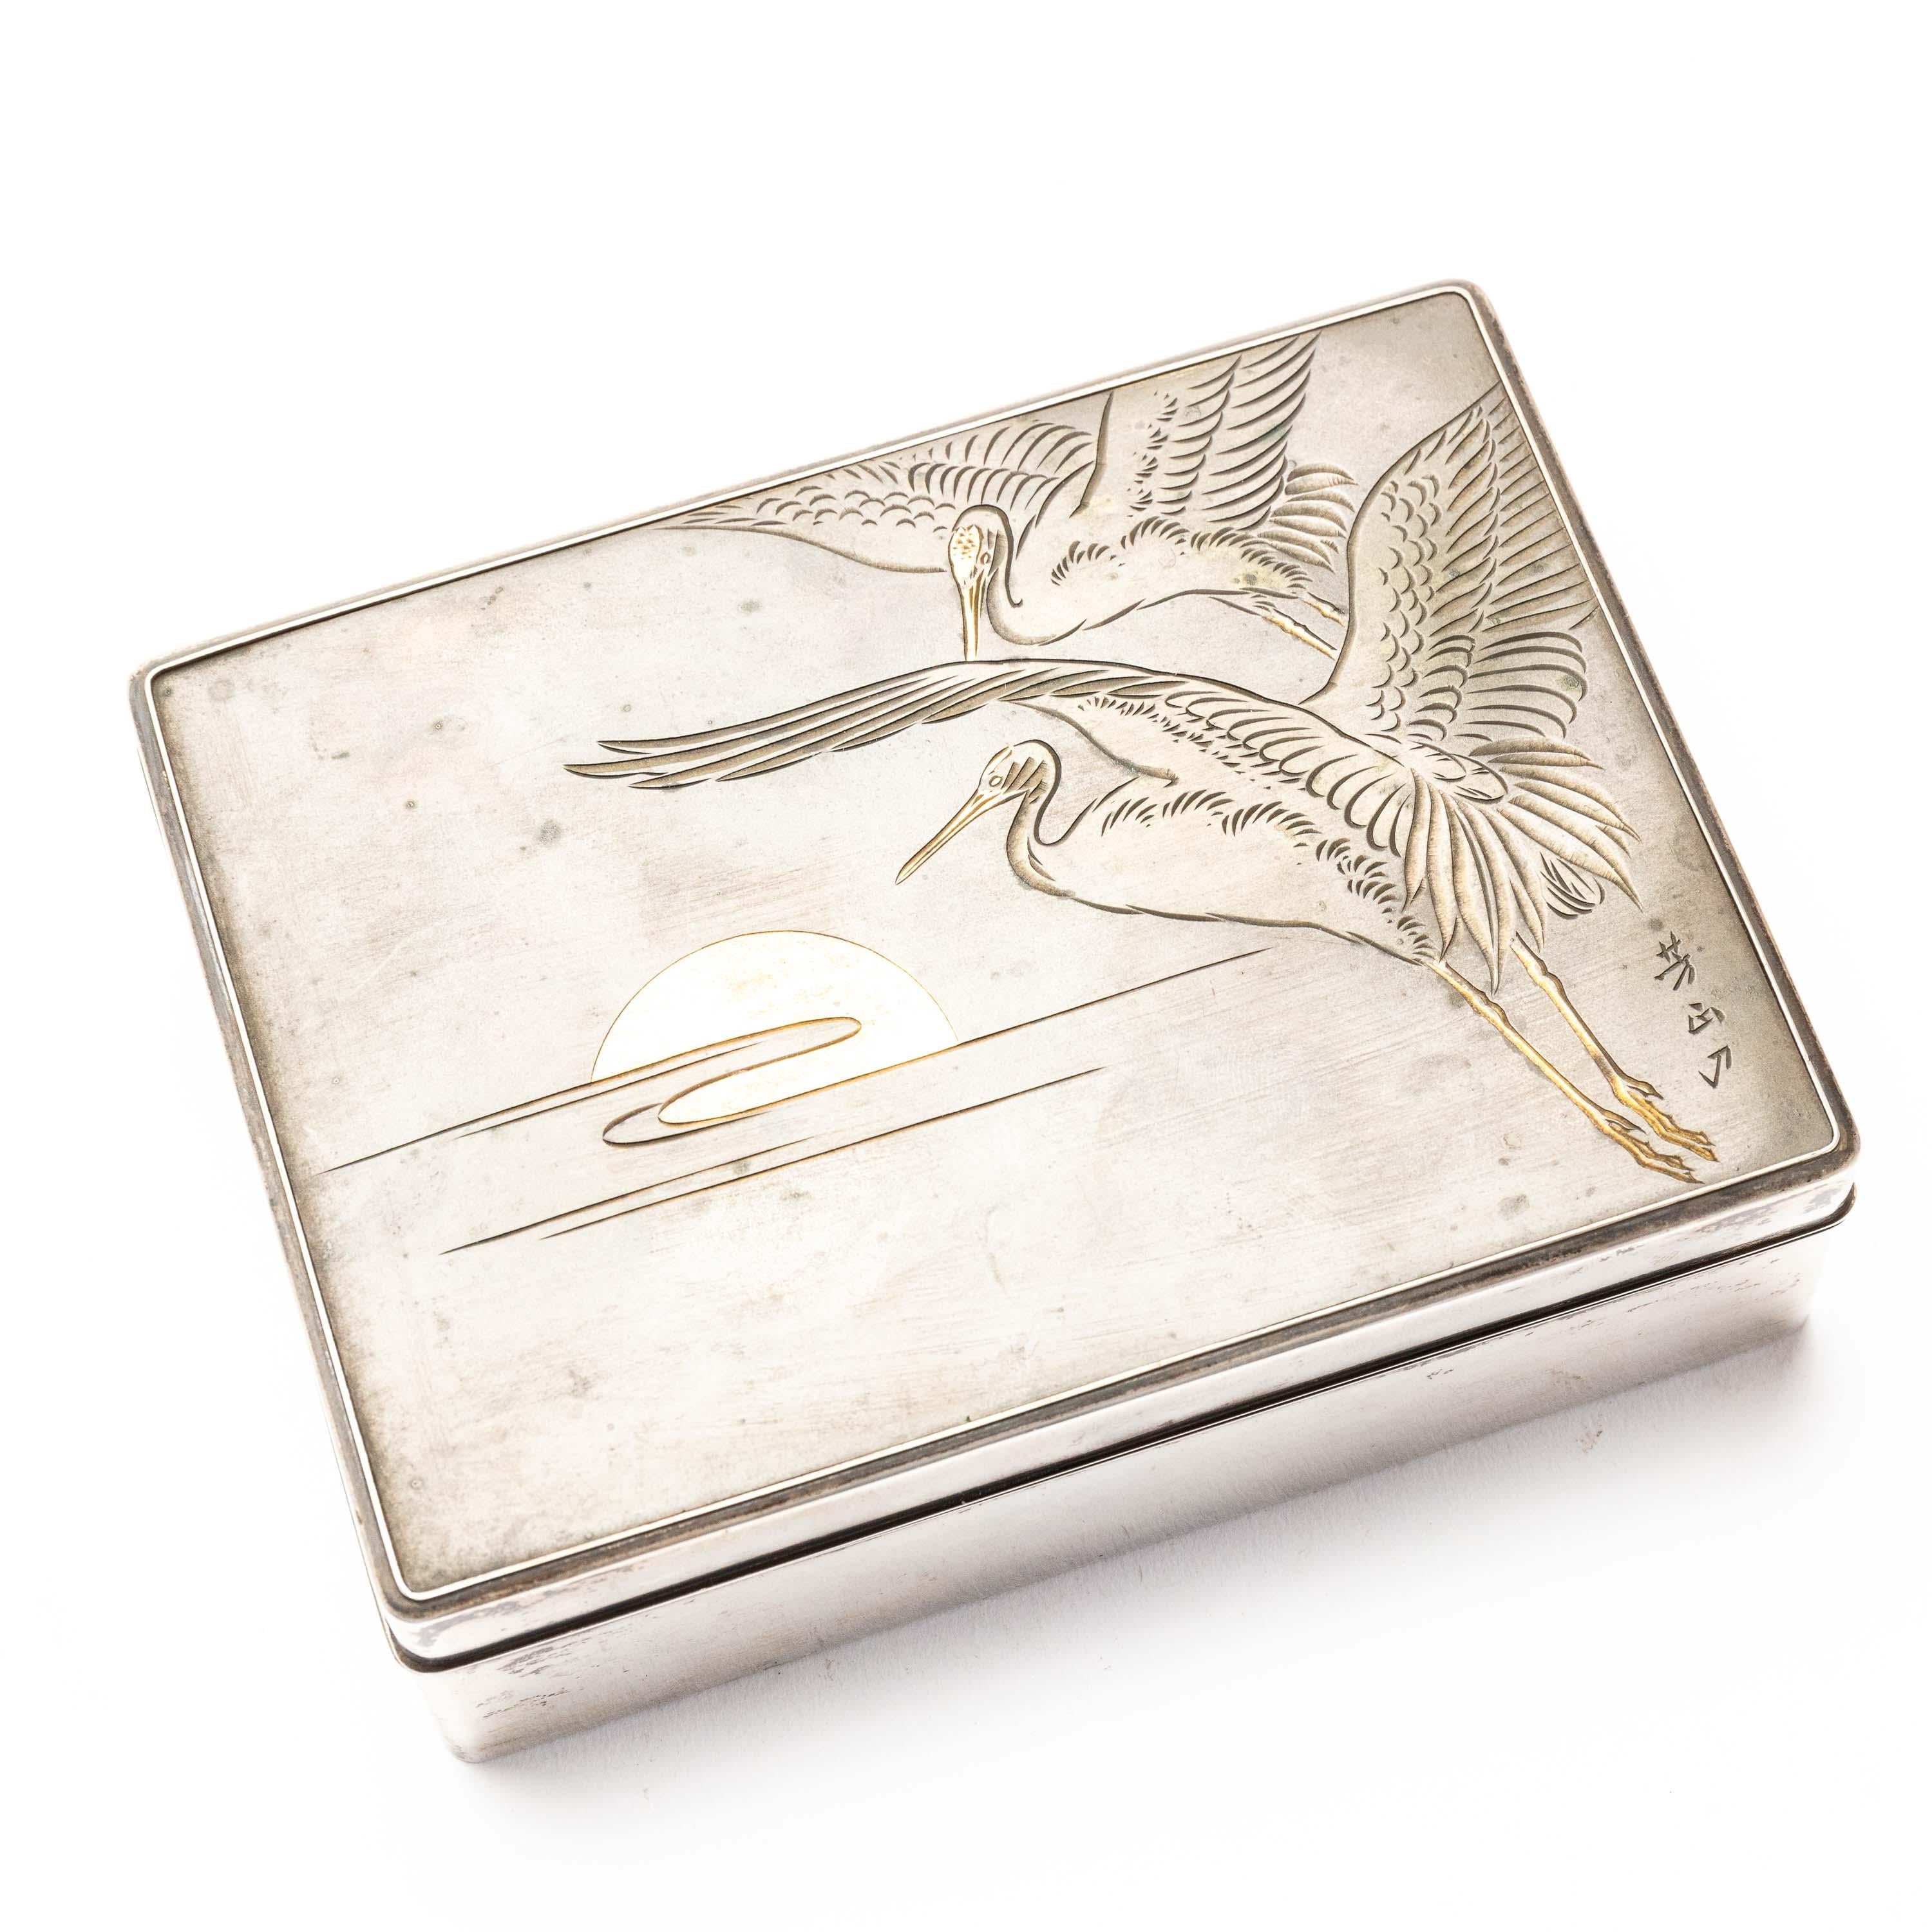 An elegant silver cigarette box from Japan, with a wooden lacquered interior. It has a delicately engraved bronze lid with a design of two cranes in flight against the rising sun. It has an artist signature on the bottom right hand corner. The